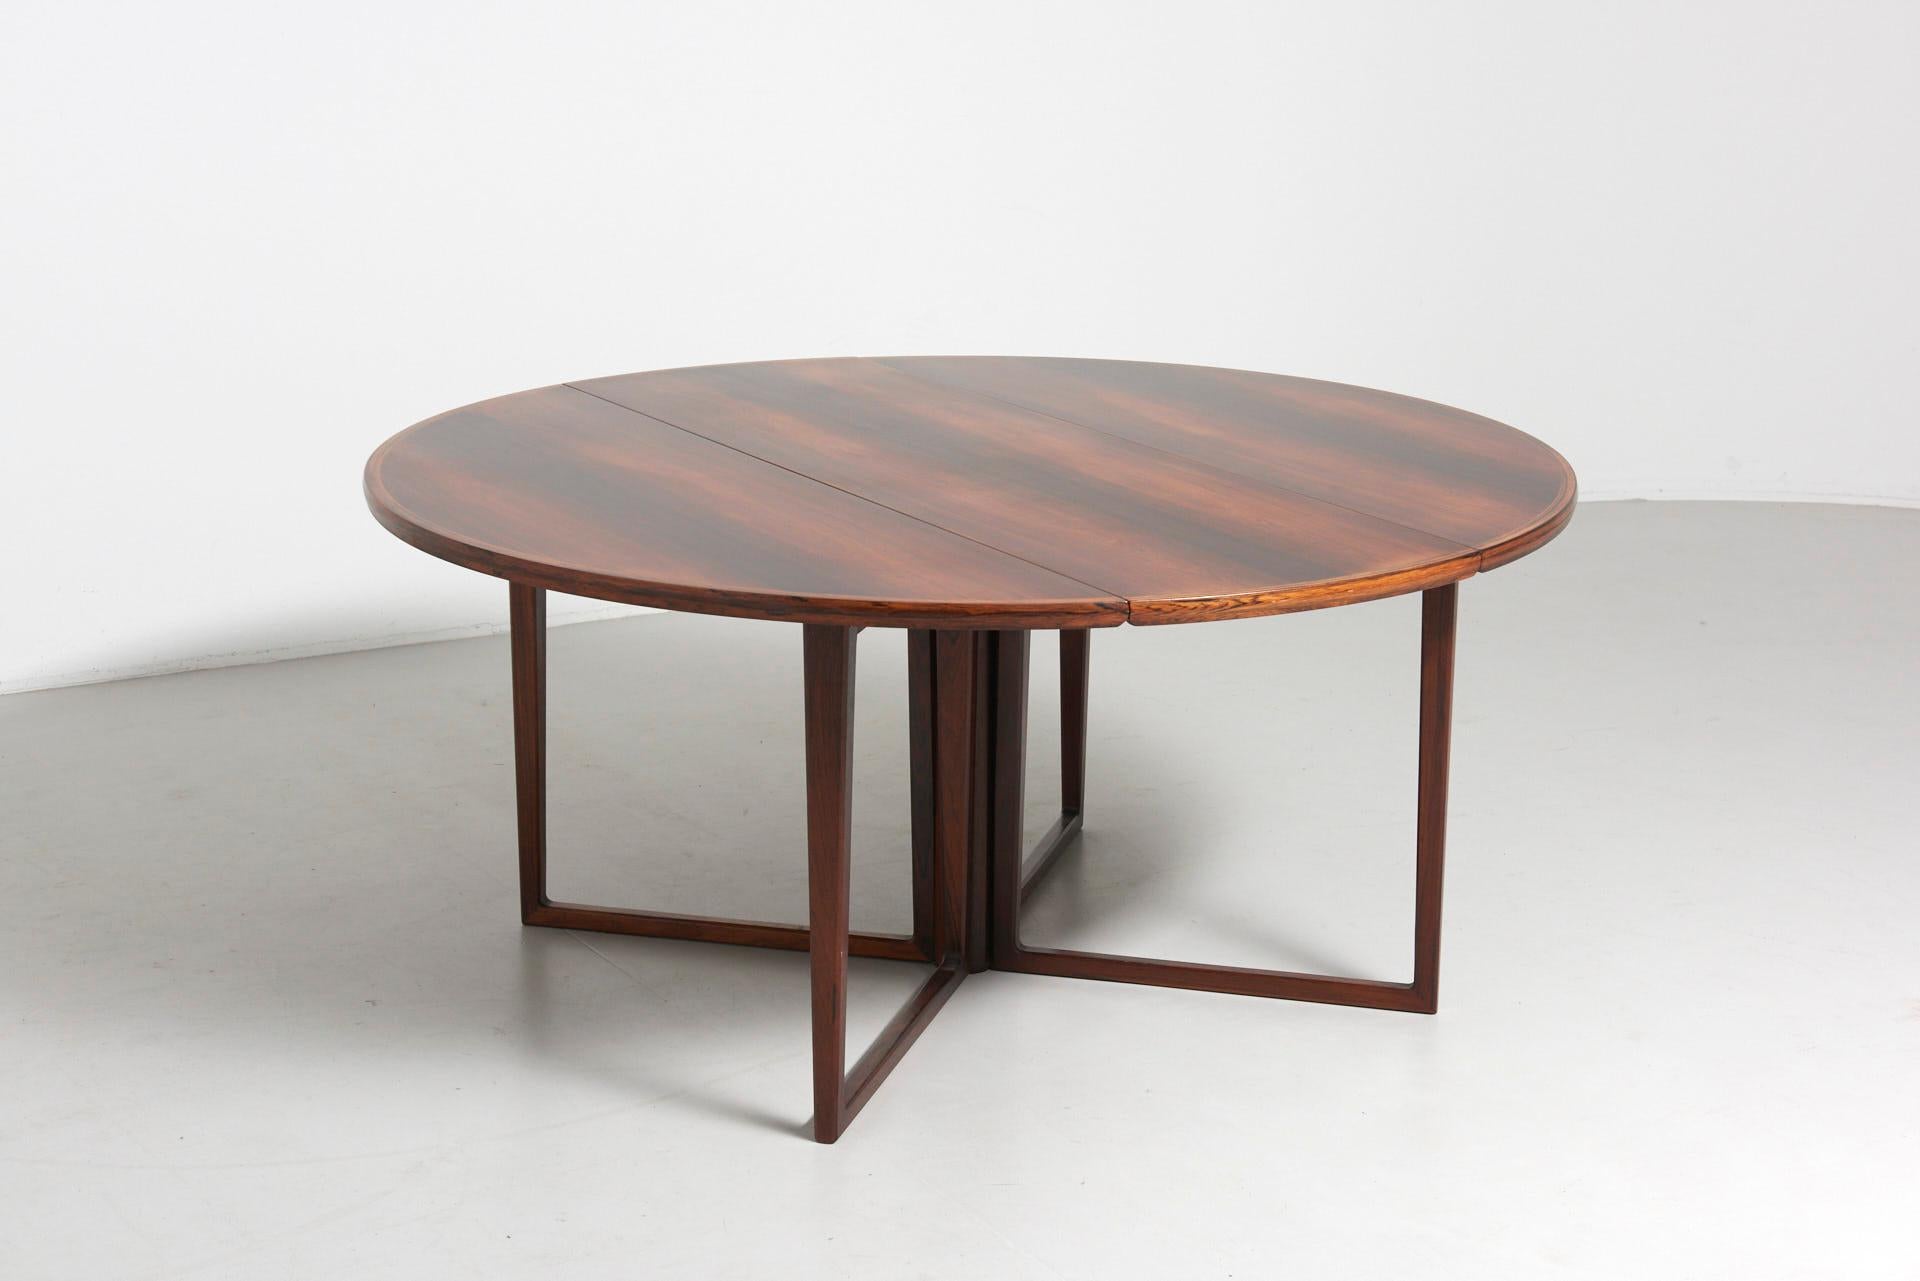 A very rare dining table, designed by Helge Sibast and produced by Sibast Møbler in Denmark in the 1960s. The foldable tabletop and sliding legs are all in solid Brazilian rosewood. The table is in very good condition.